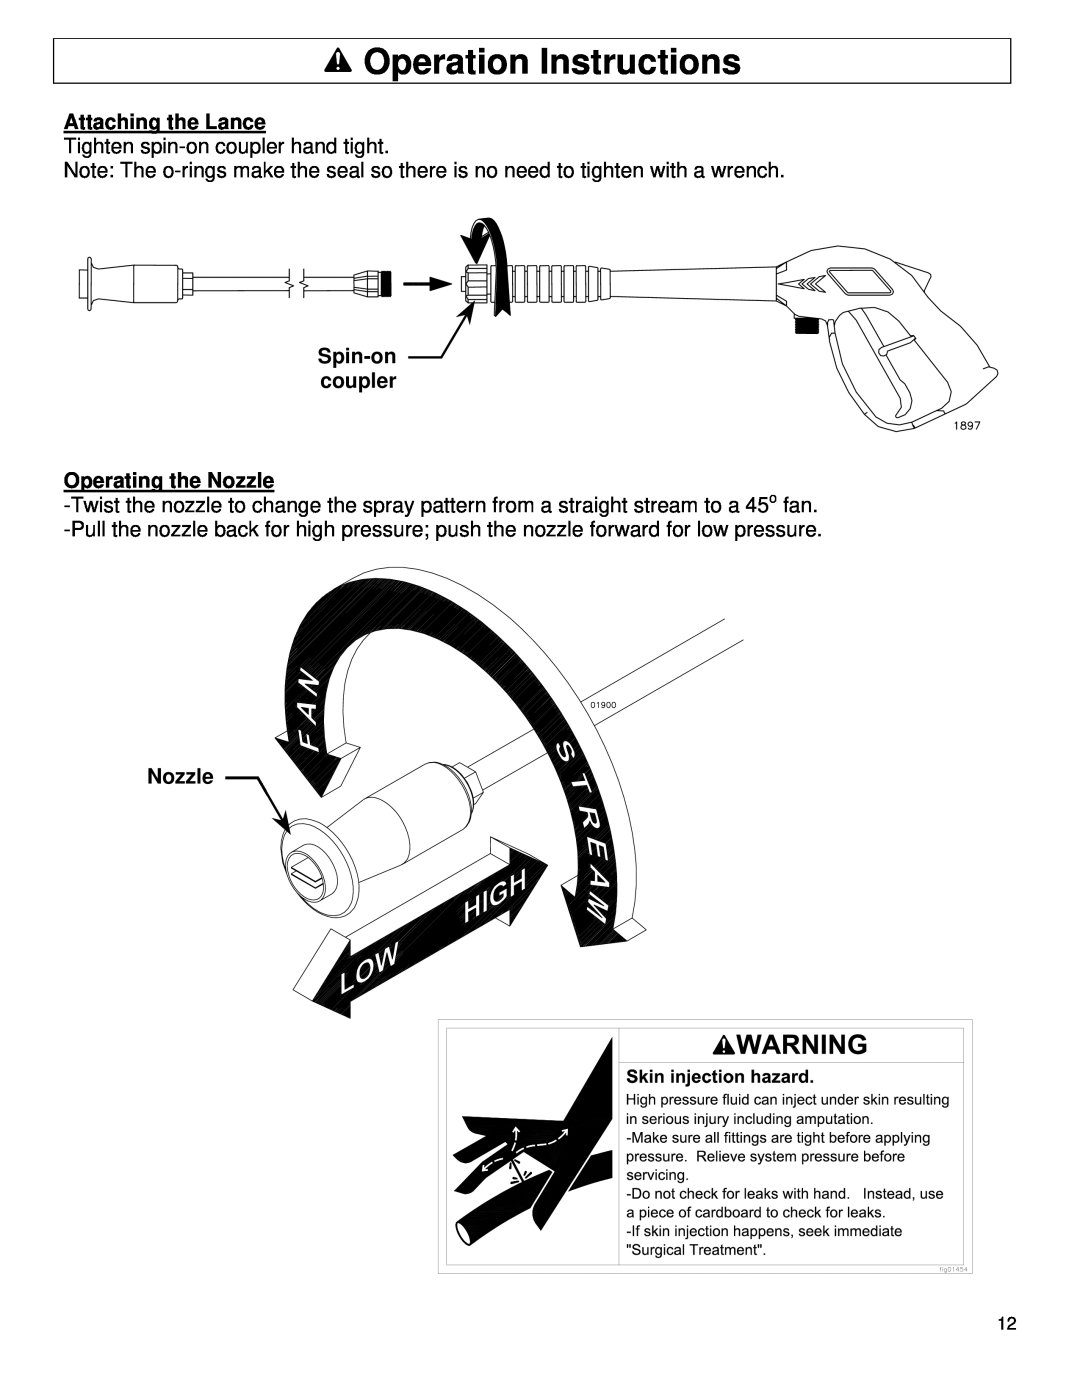 North Star M157477A owner manual Operation Instructions, Attaching the Lance, Spin-on coupler Operating the Nozzle 